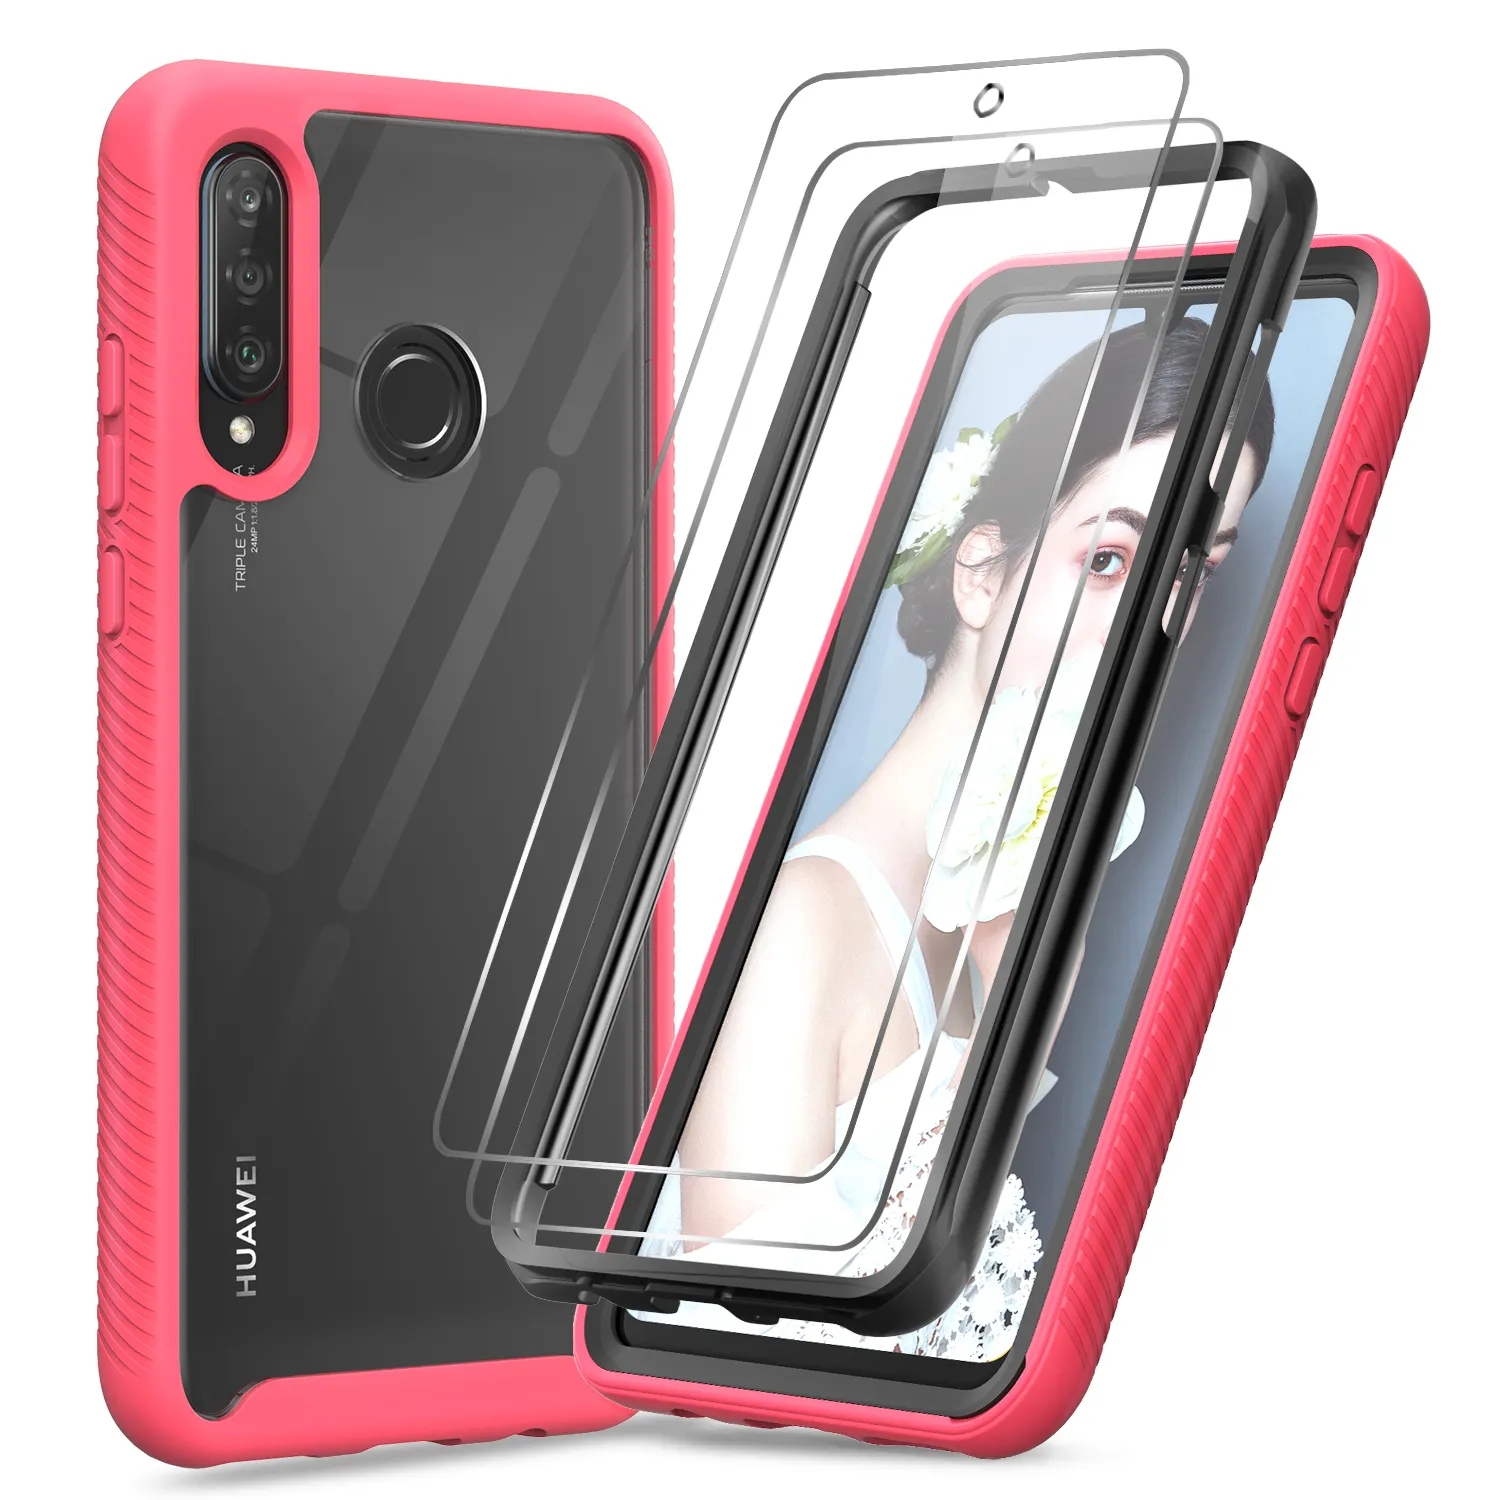 LeYi For Huawei p30 Lite Case Armor Hybrid Rugged Protective Clear Bumper Case for Oneplus one plus 1+9 9r 6t back cover